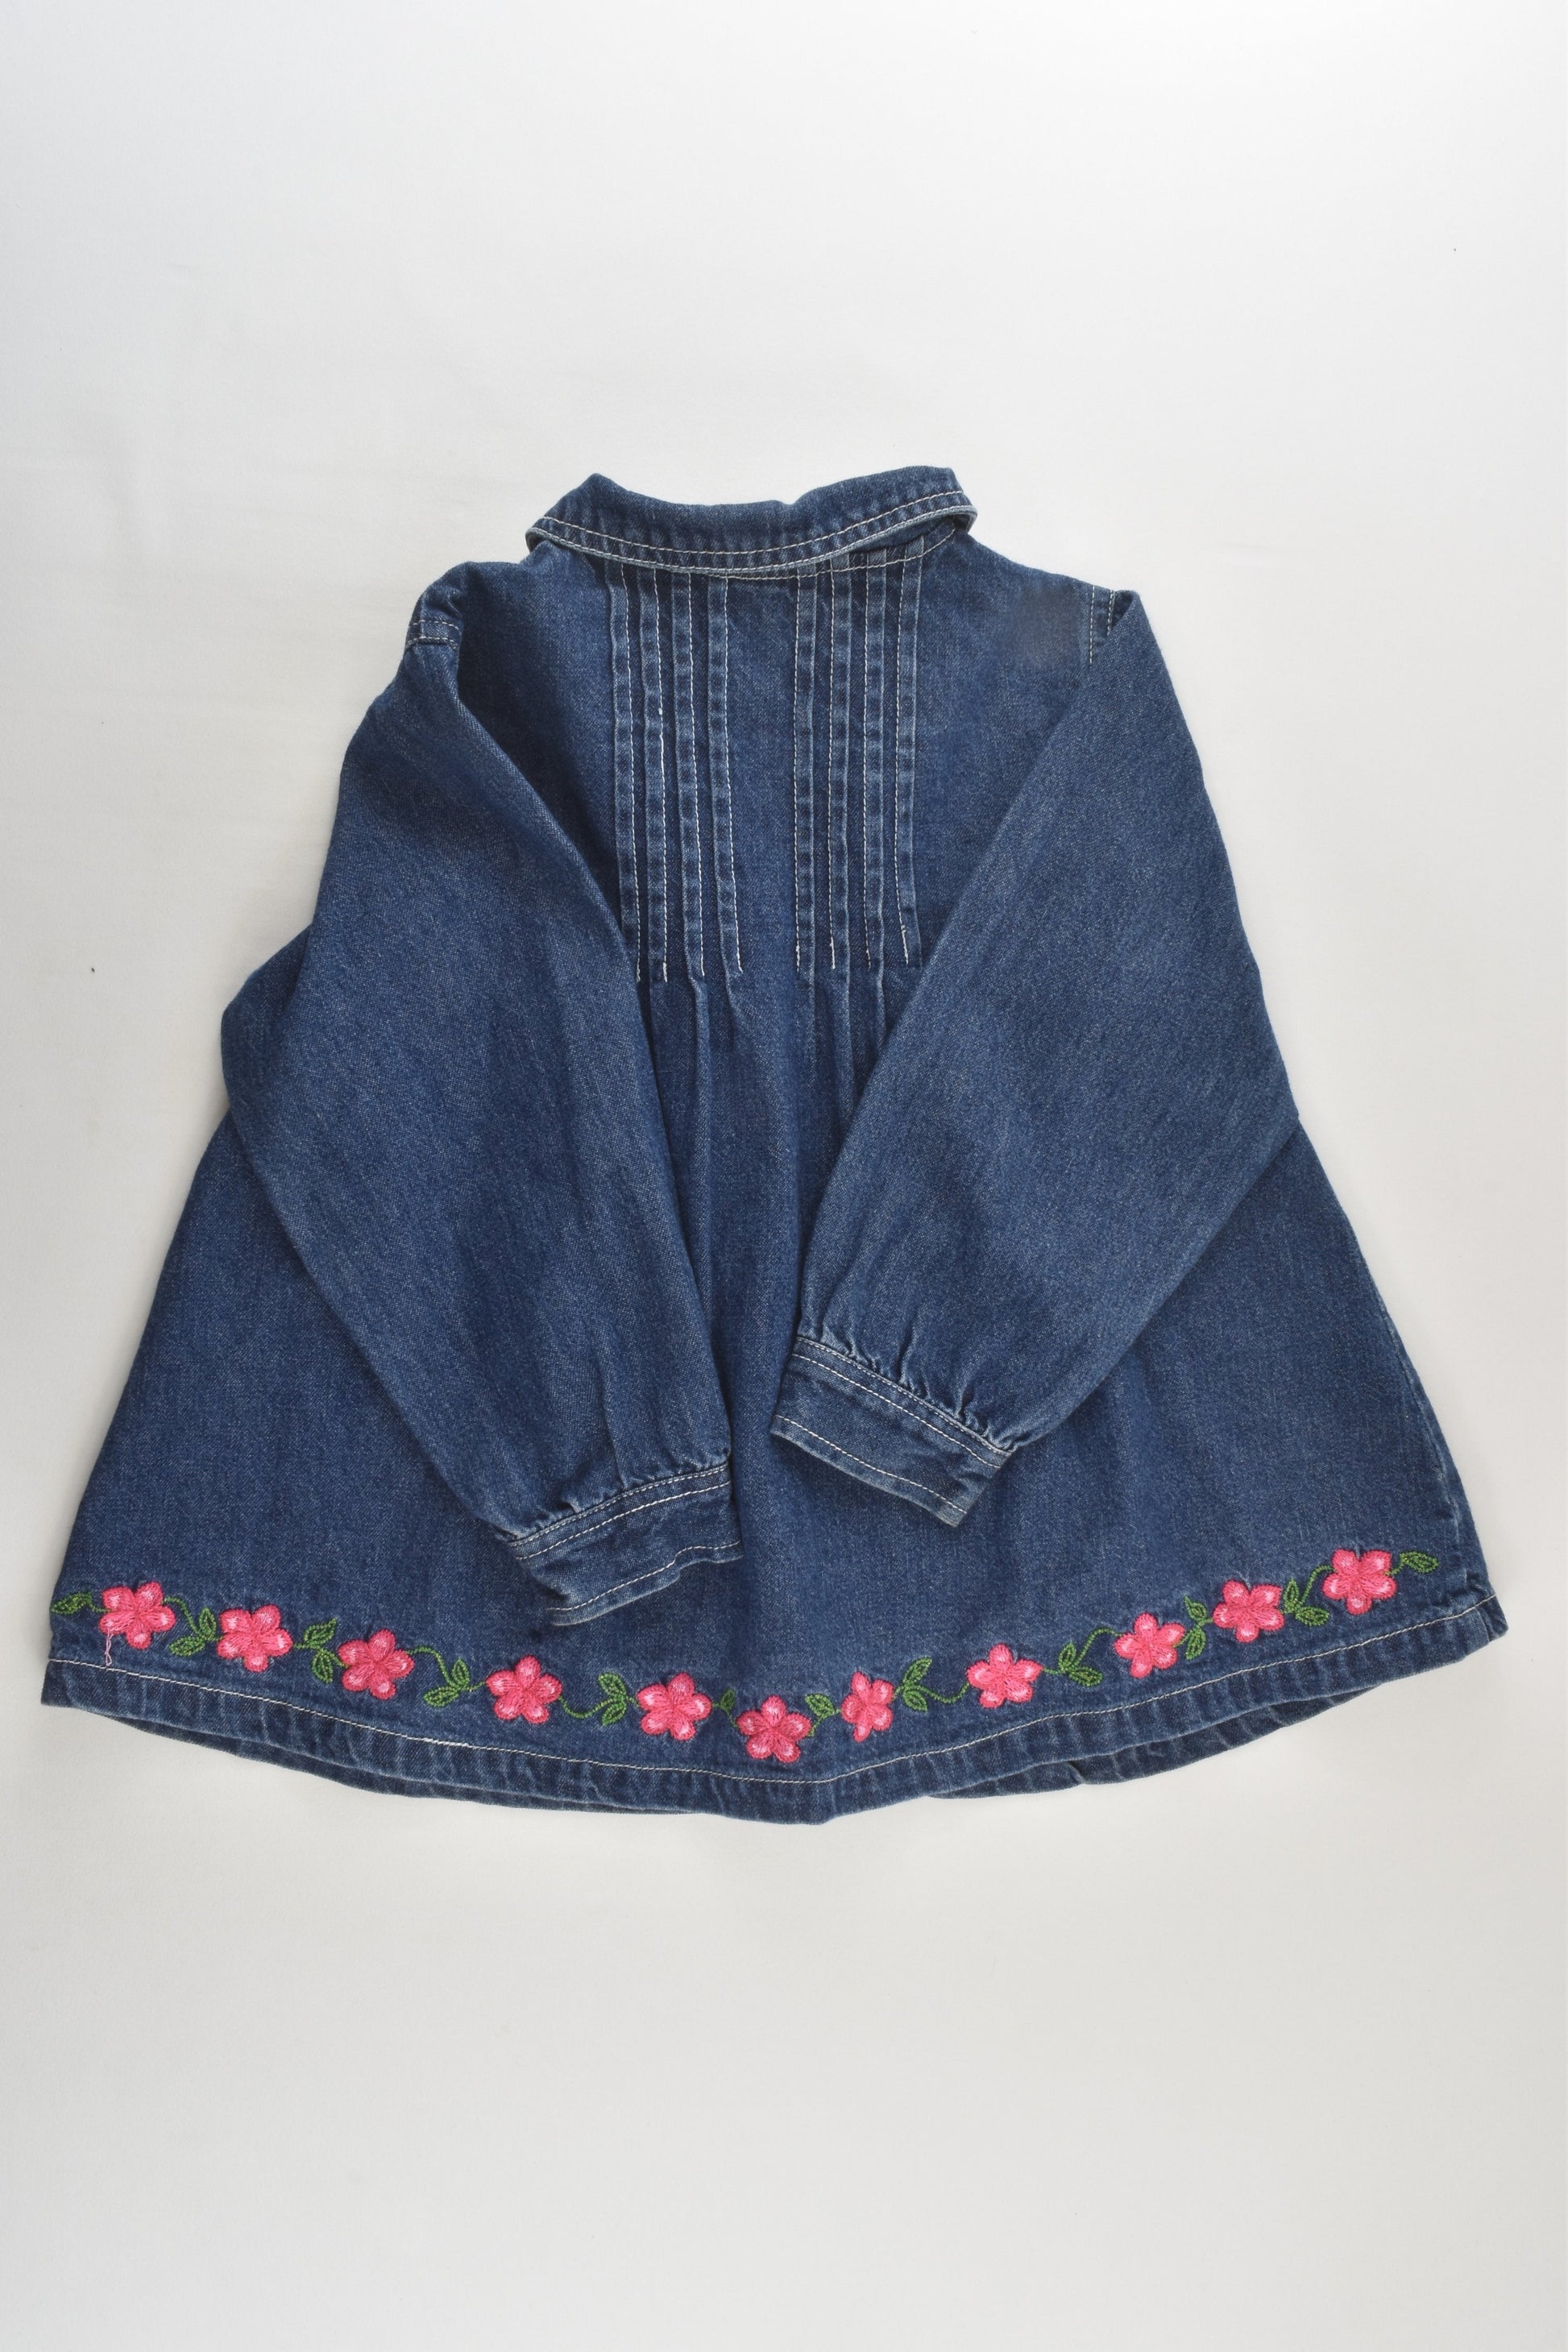 Pumpkin Patch Size 3 Denim Blouse with Floral Embroidery